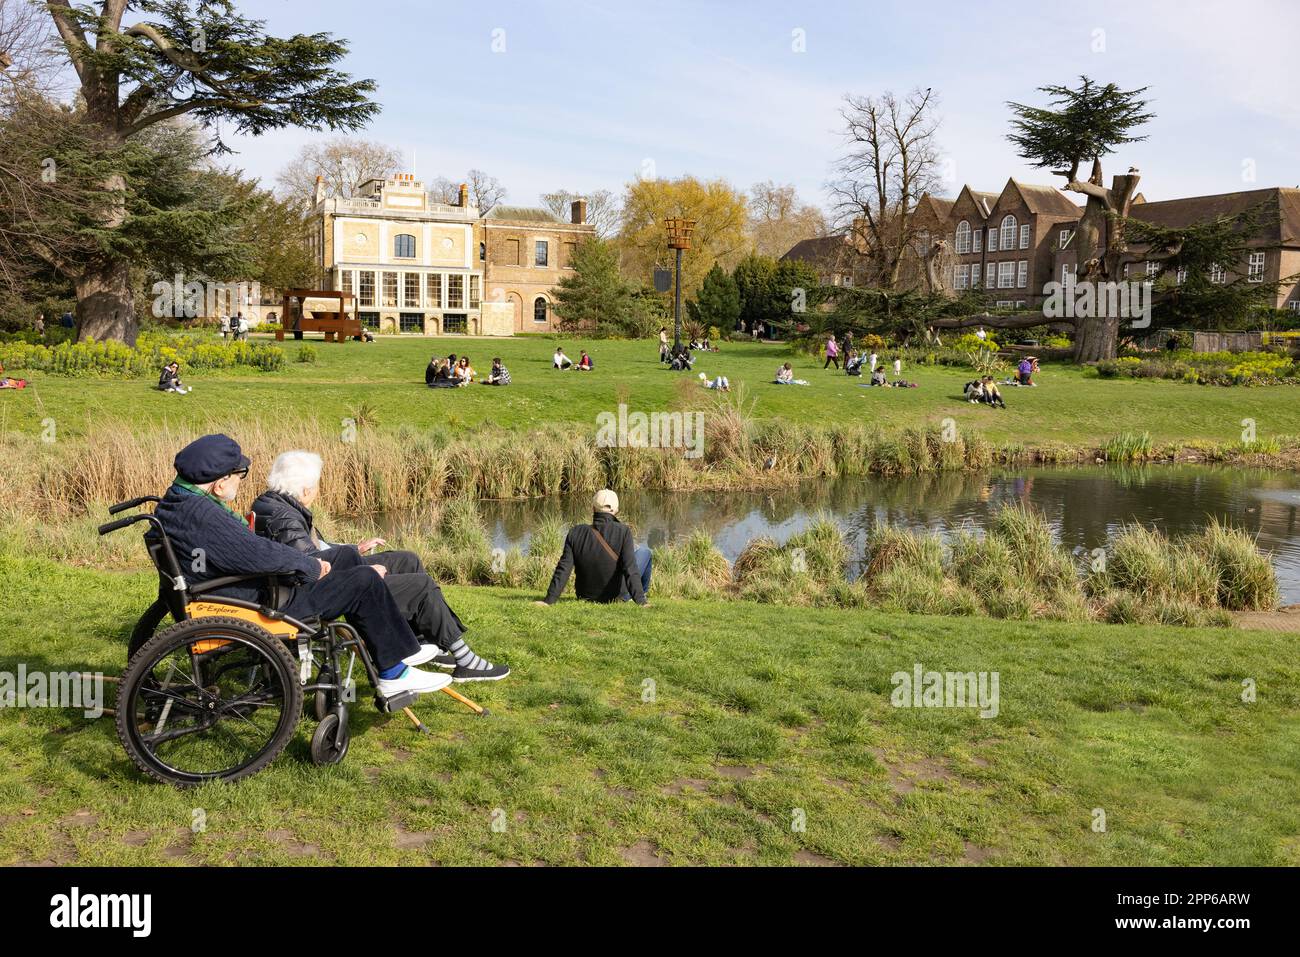 Elderly couple, one disabled in a wheelchair, sitting in a park in spring; Walpole Park, Ealing, London UK; -  Disabled access to public space. Stock Photo